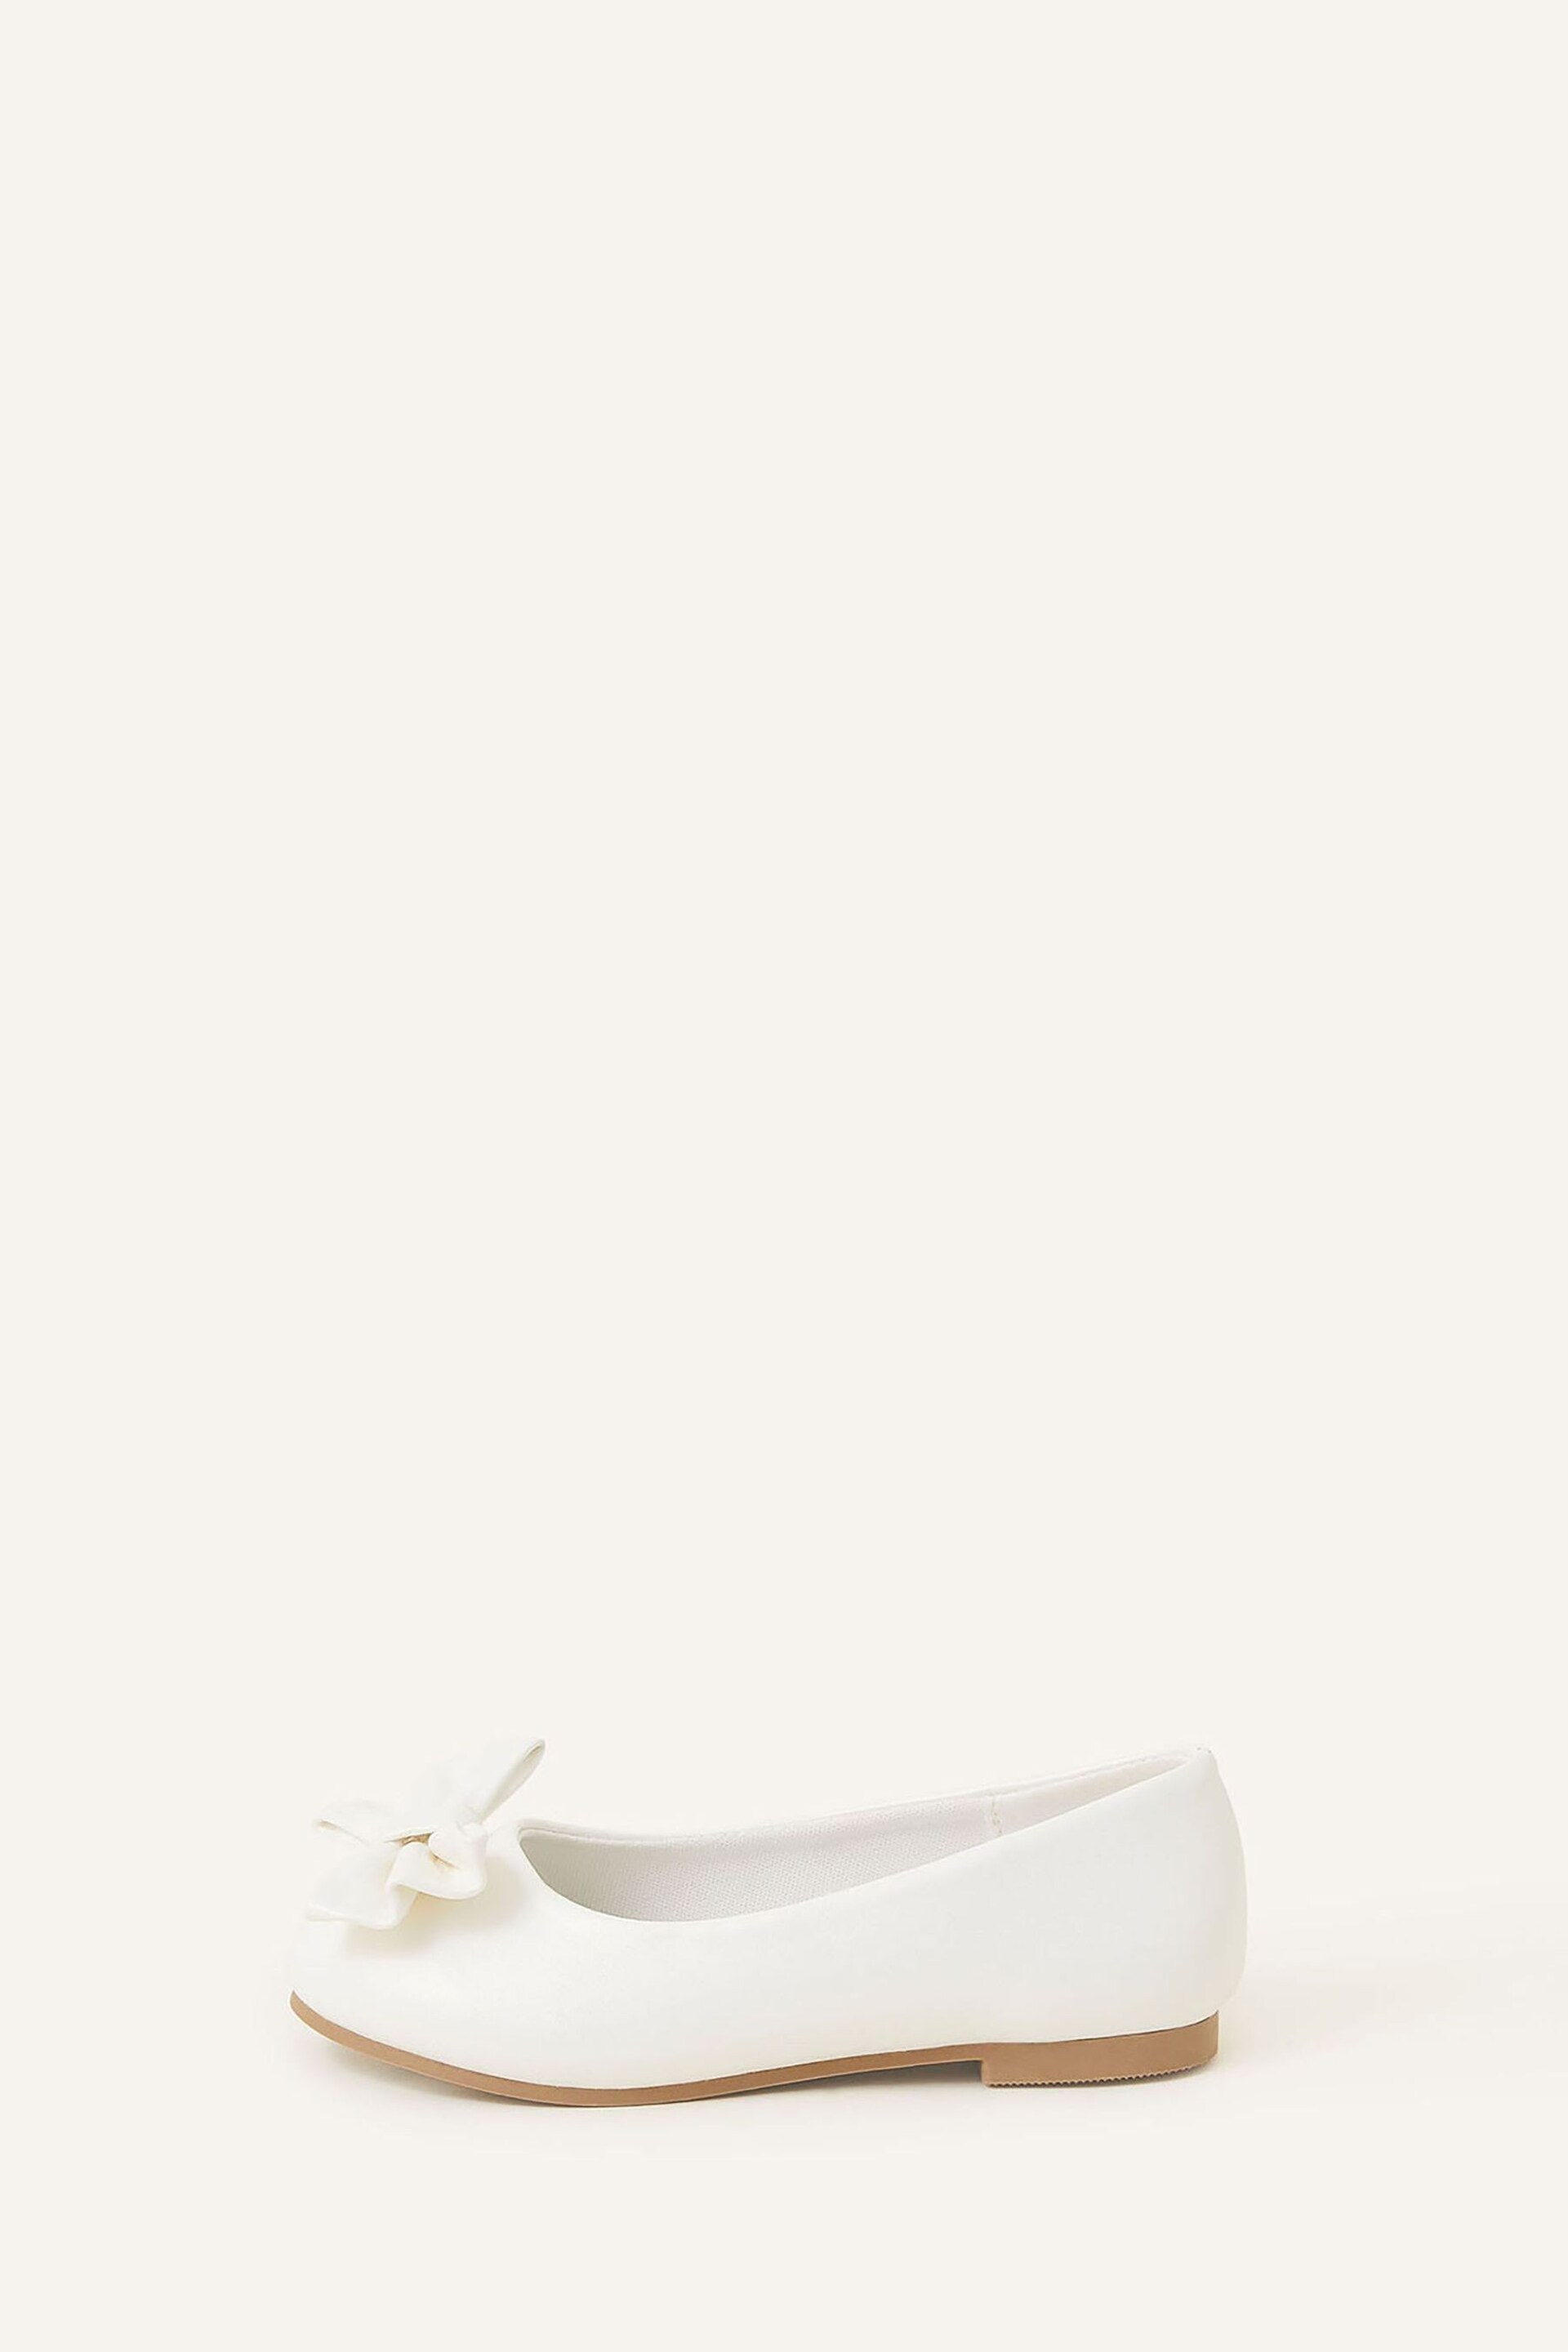 Angels by Accessorize Girls Natural Bow Ballerina Flats - Image 3 of 3